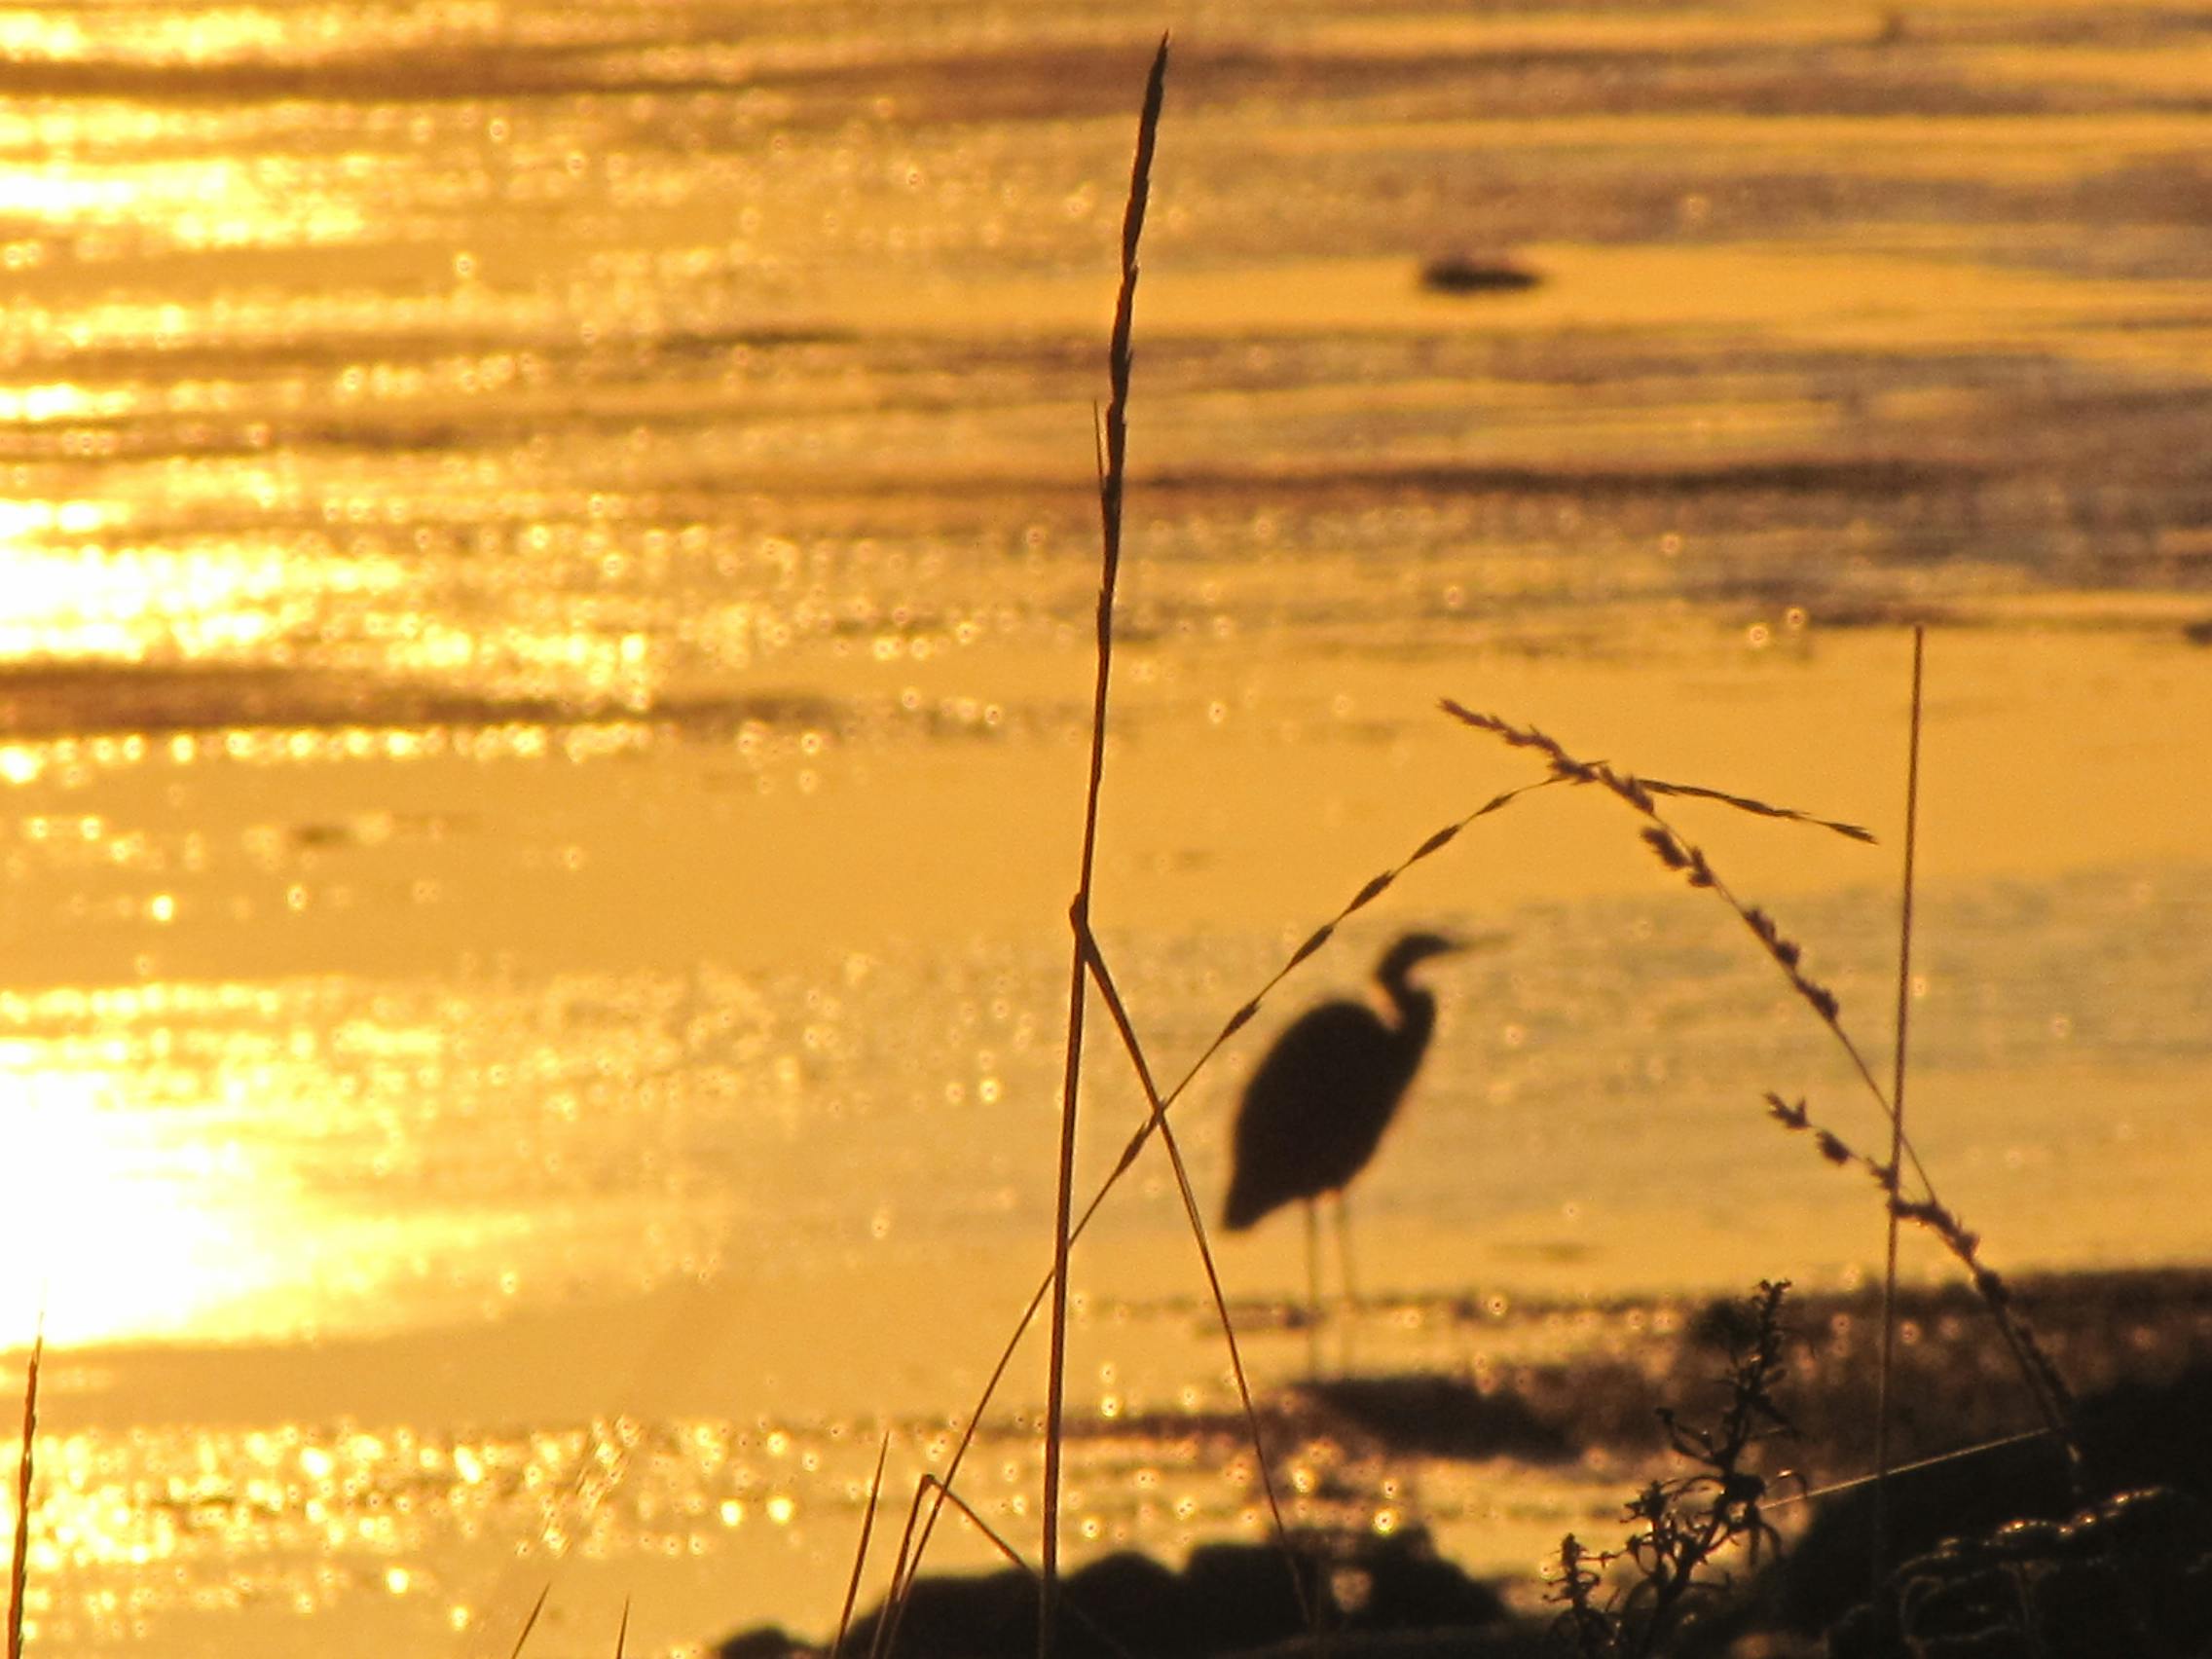 The beauty and tranquility echo within The Great Blue Heron, sunset Boundary Bay 